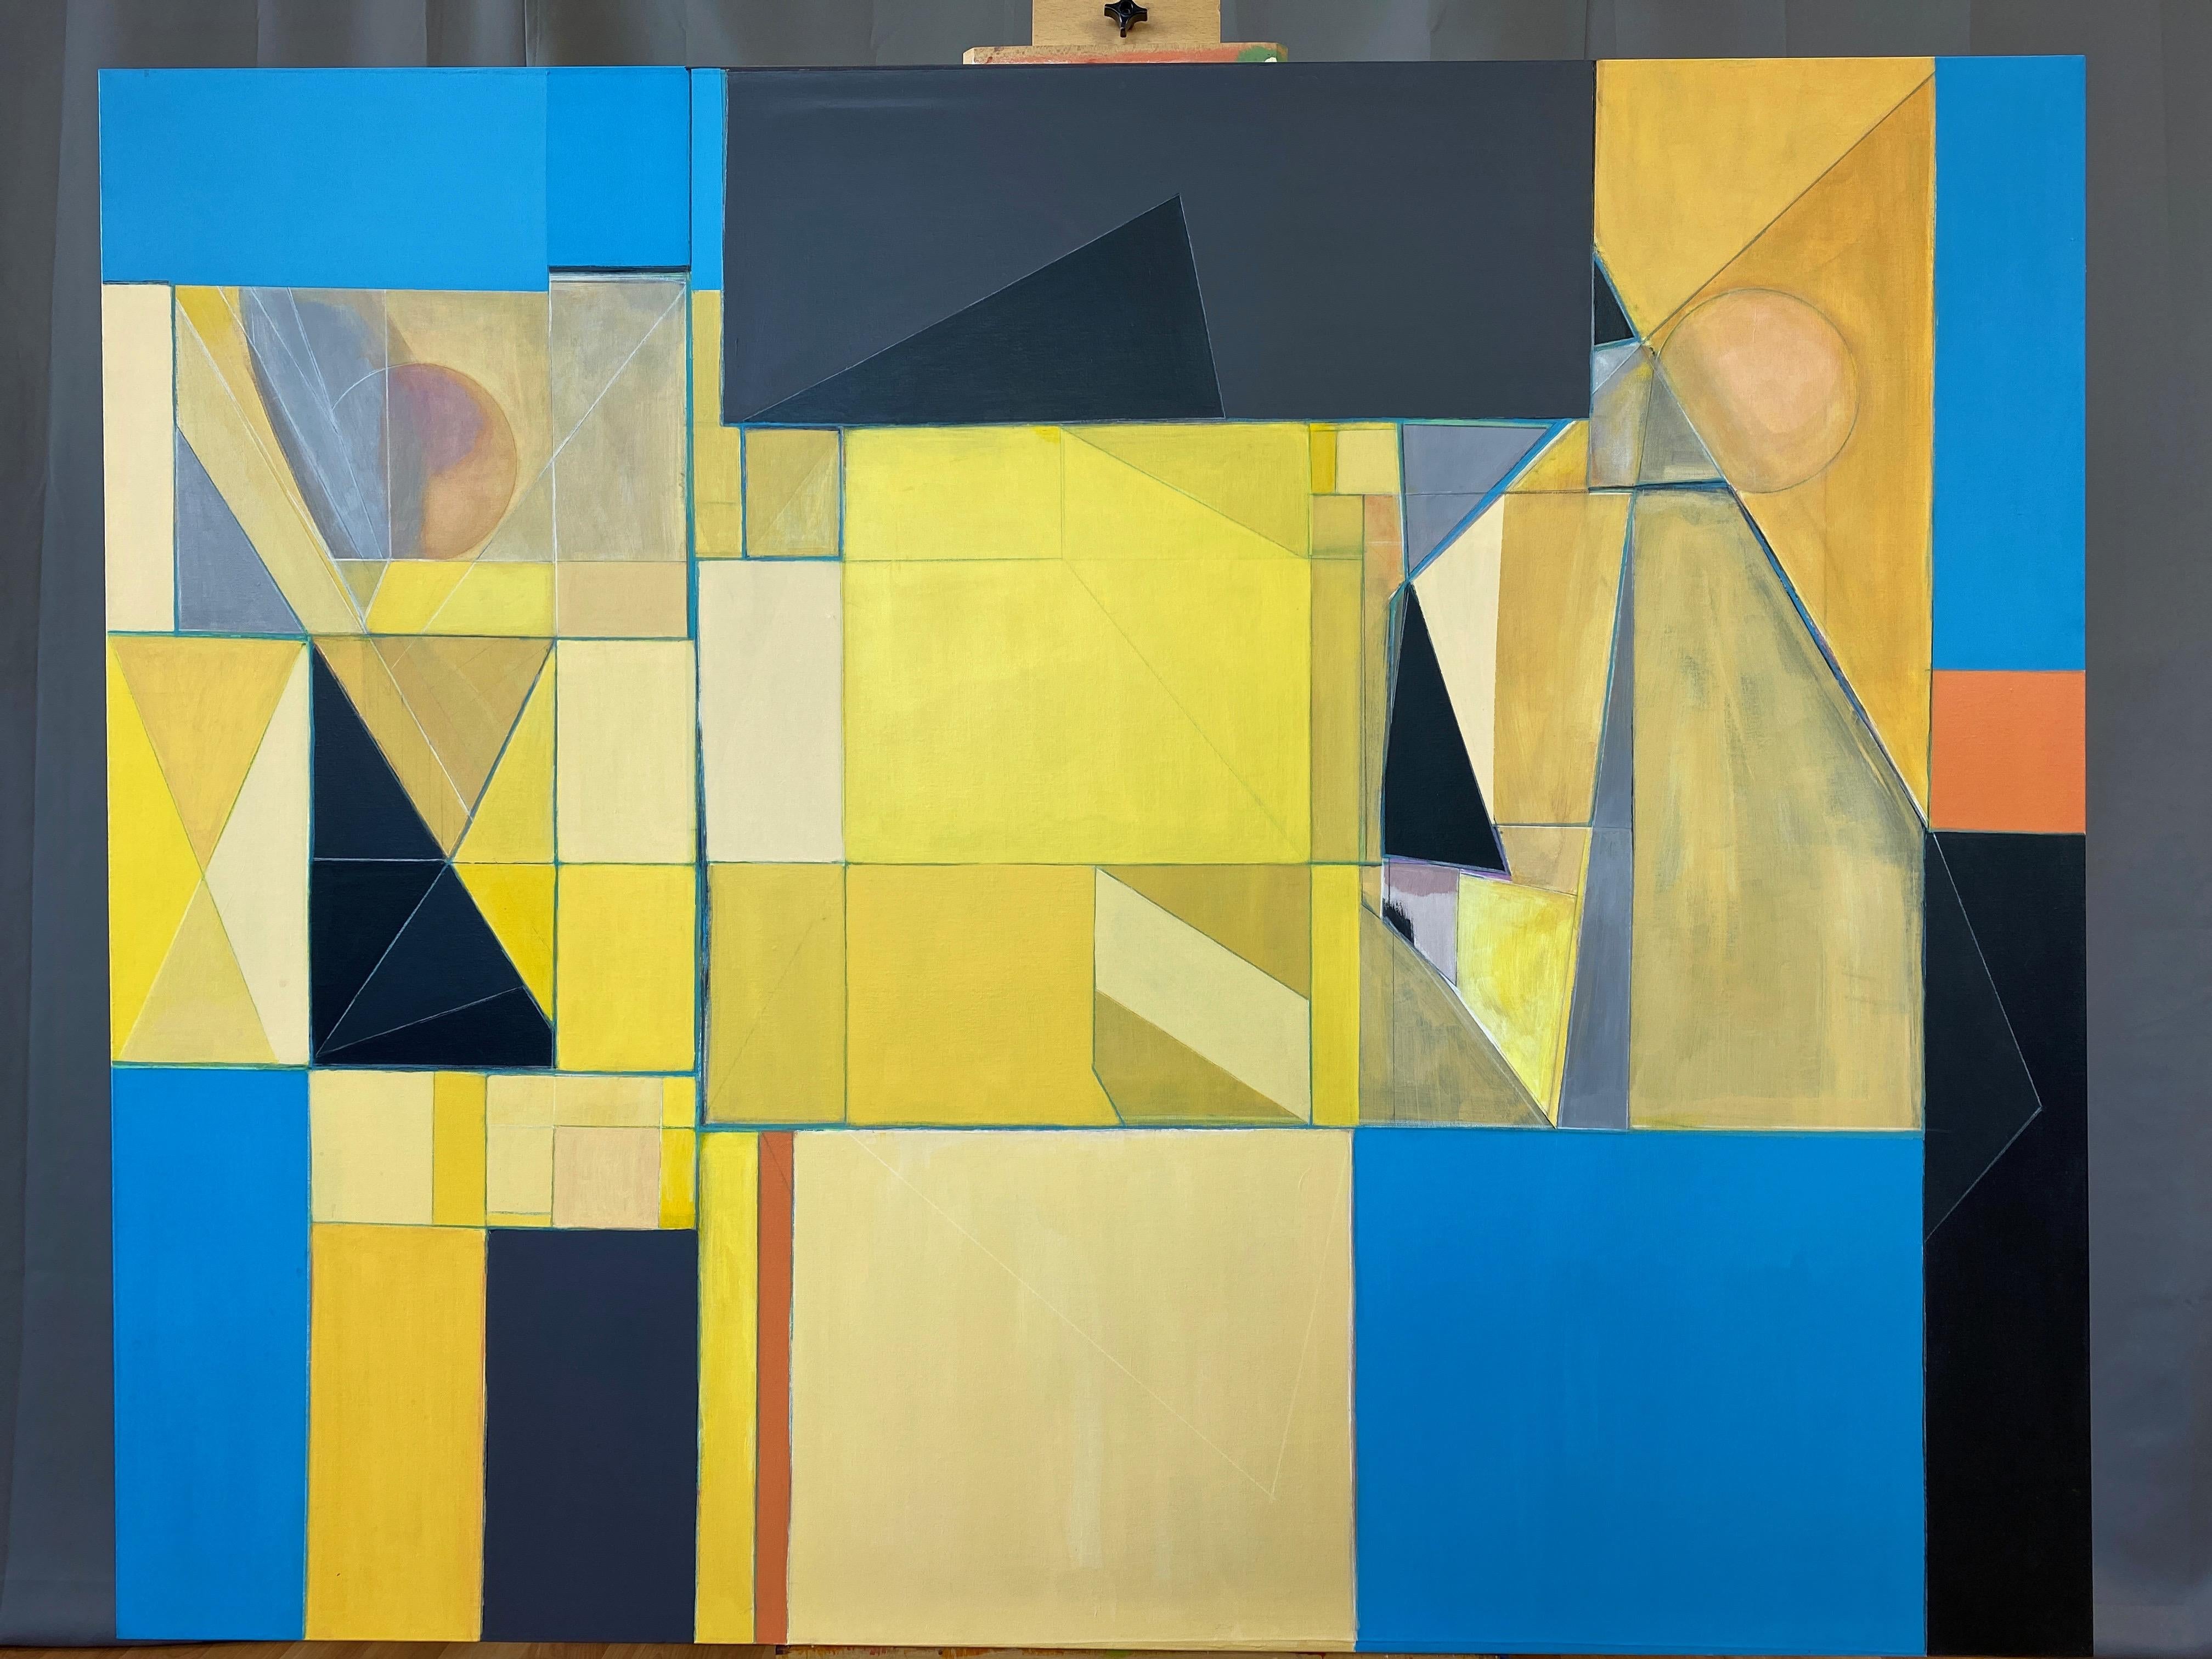 Robert English “Etheric Double”, Large Abstract Cubist Painting, 1994-1995 9